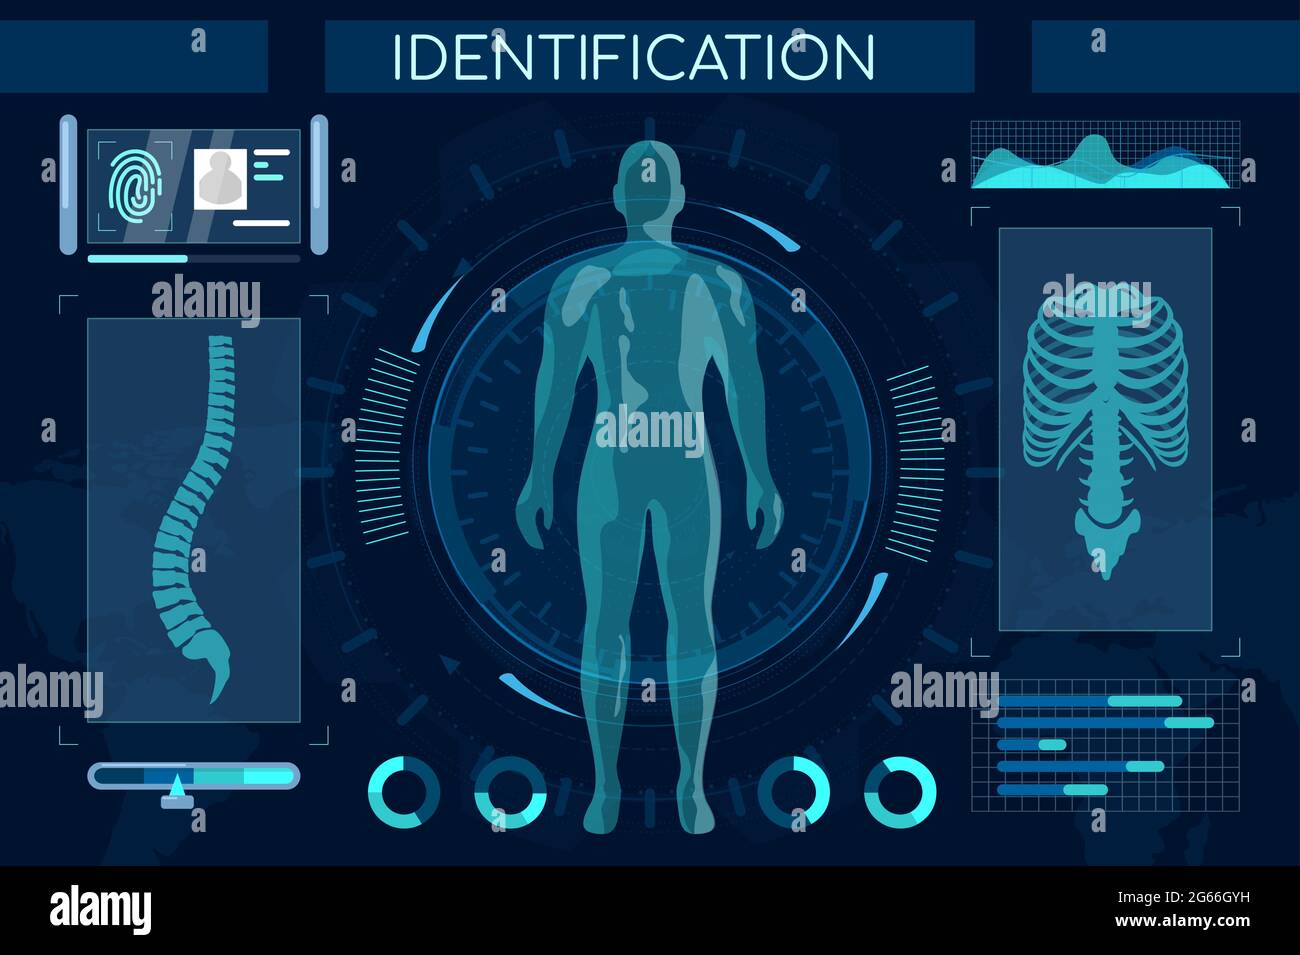 Futuristic identification process flat illustration. Smart recognition system, full body scan. Human digital model, spine and thorax with personal Stock Vector